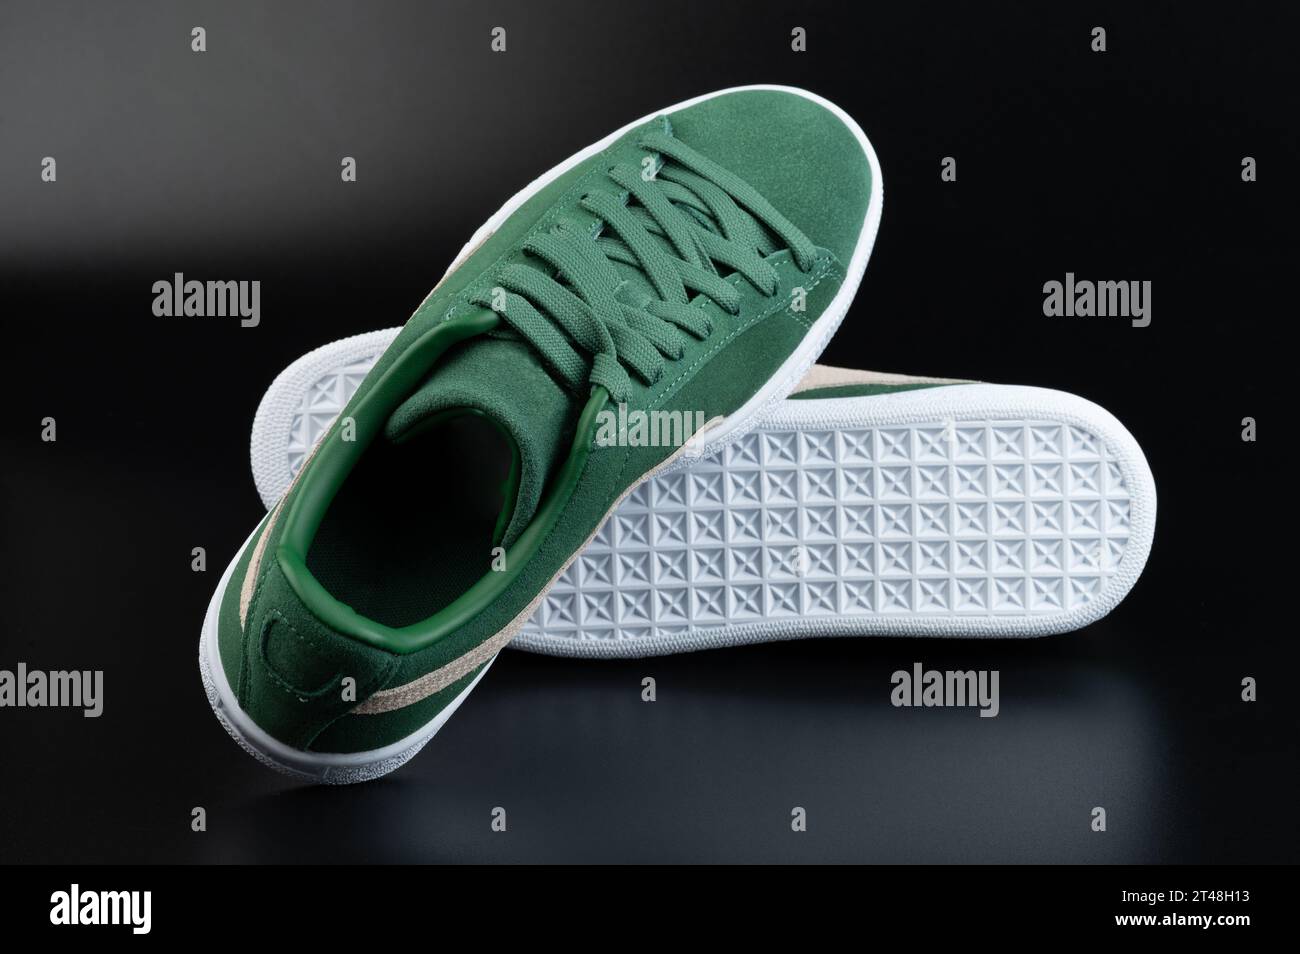 Pair of green casual shoes with white sole isolated on black background Stock Photo